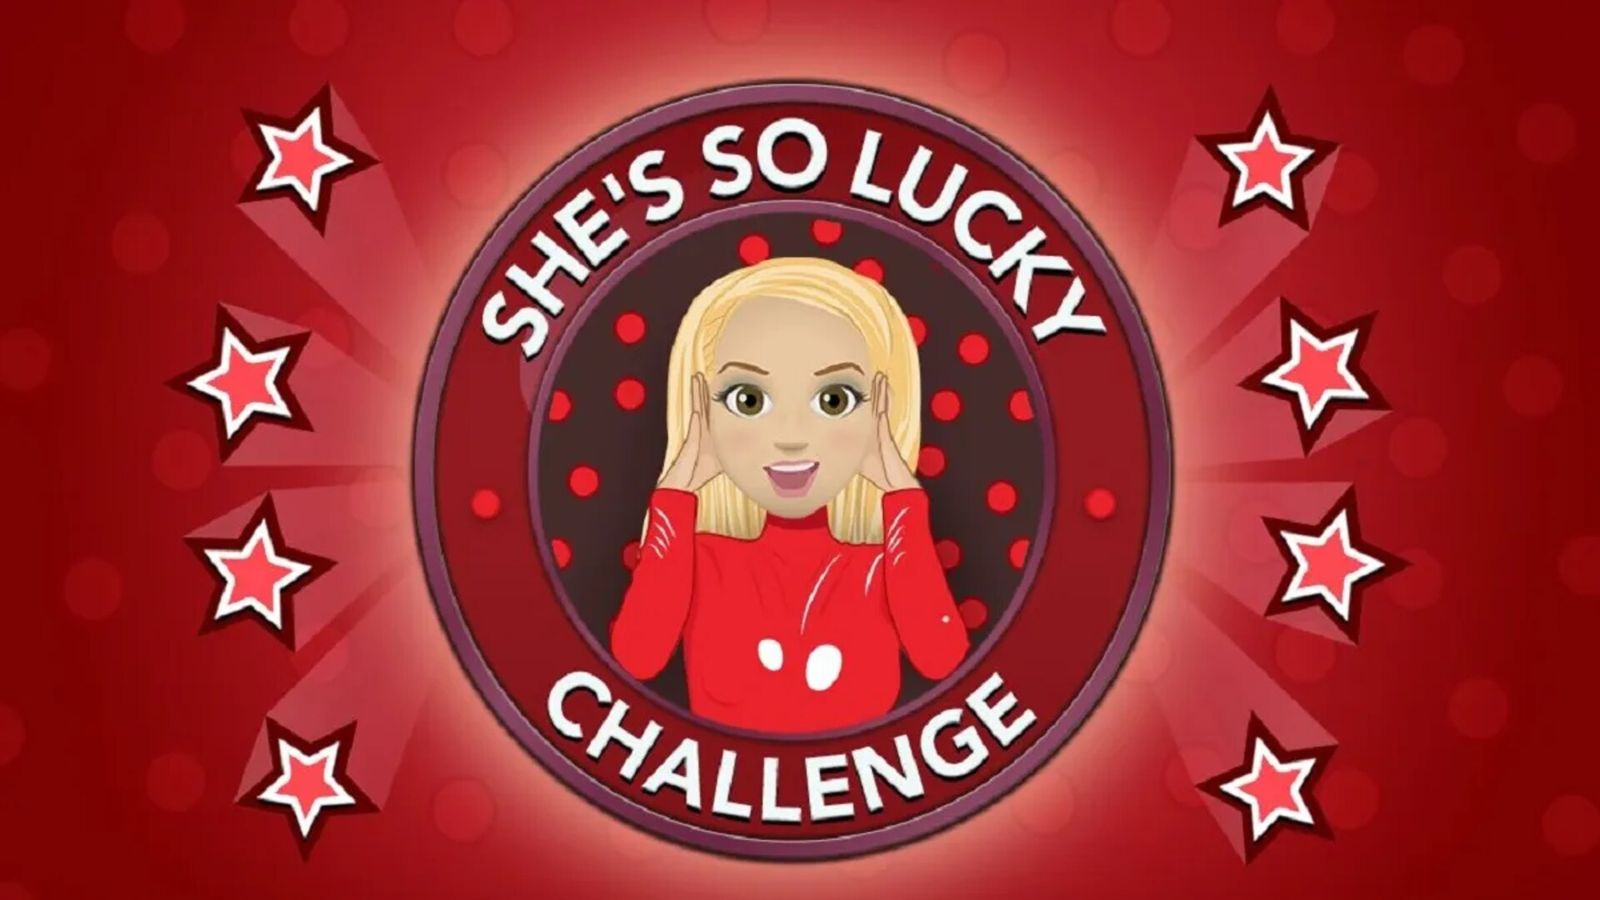 She's So Lucky Challenge in BitLife - a girl looks happy to be so lucky